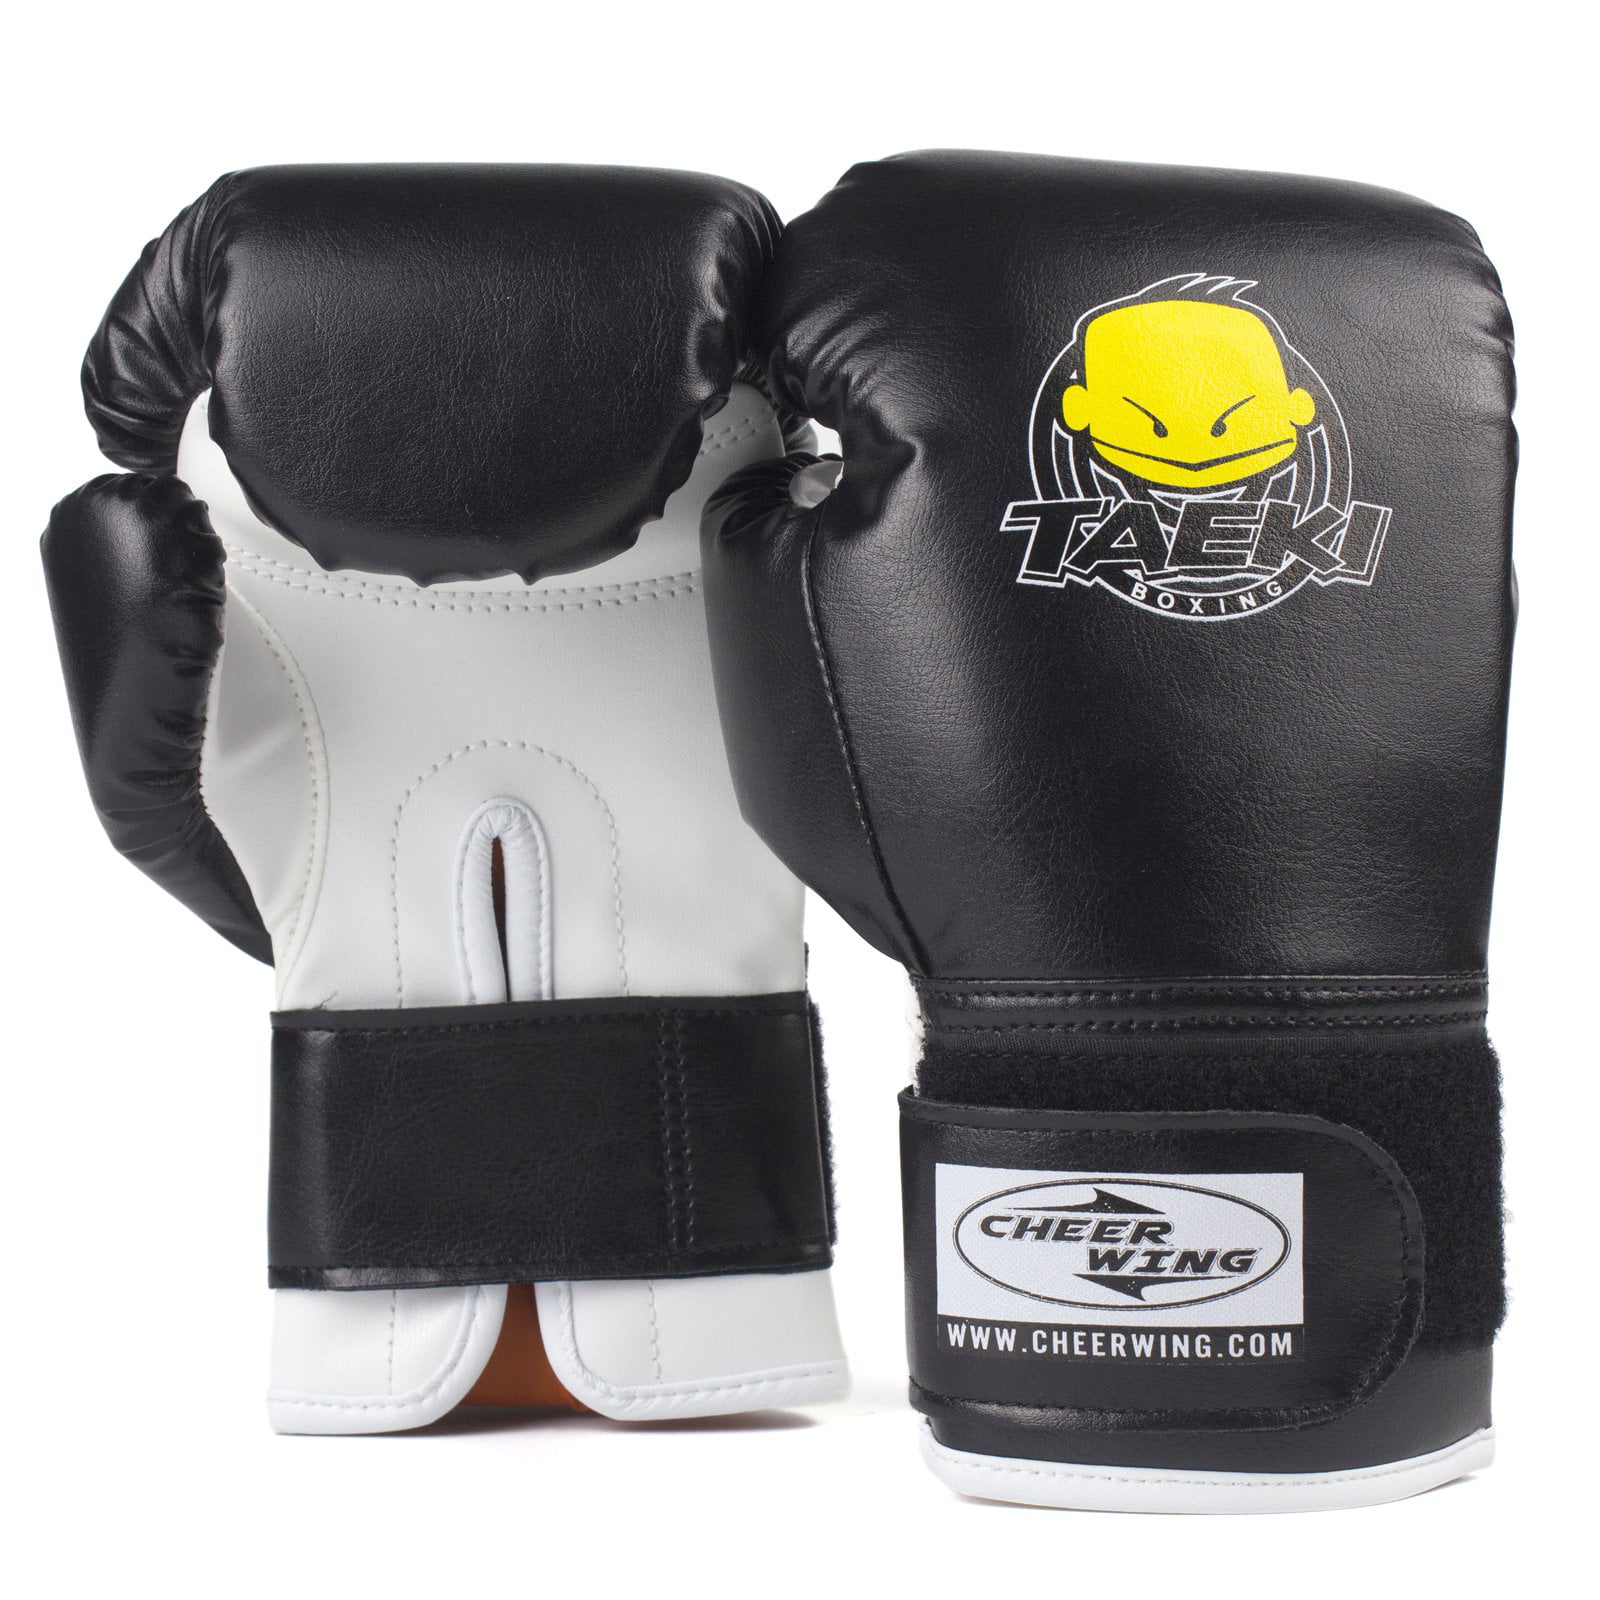 MMA Sparring Grappling Boxing Fight Punch Ultimate Mitts PU Leather Gloves 